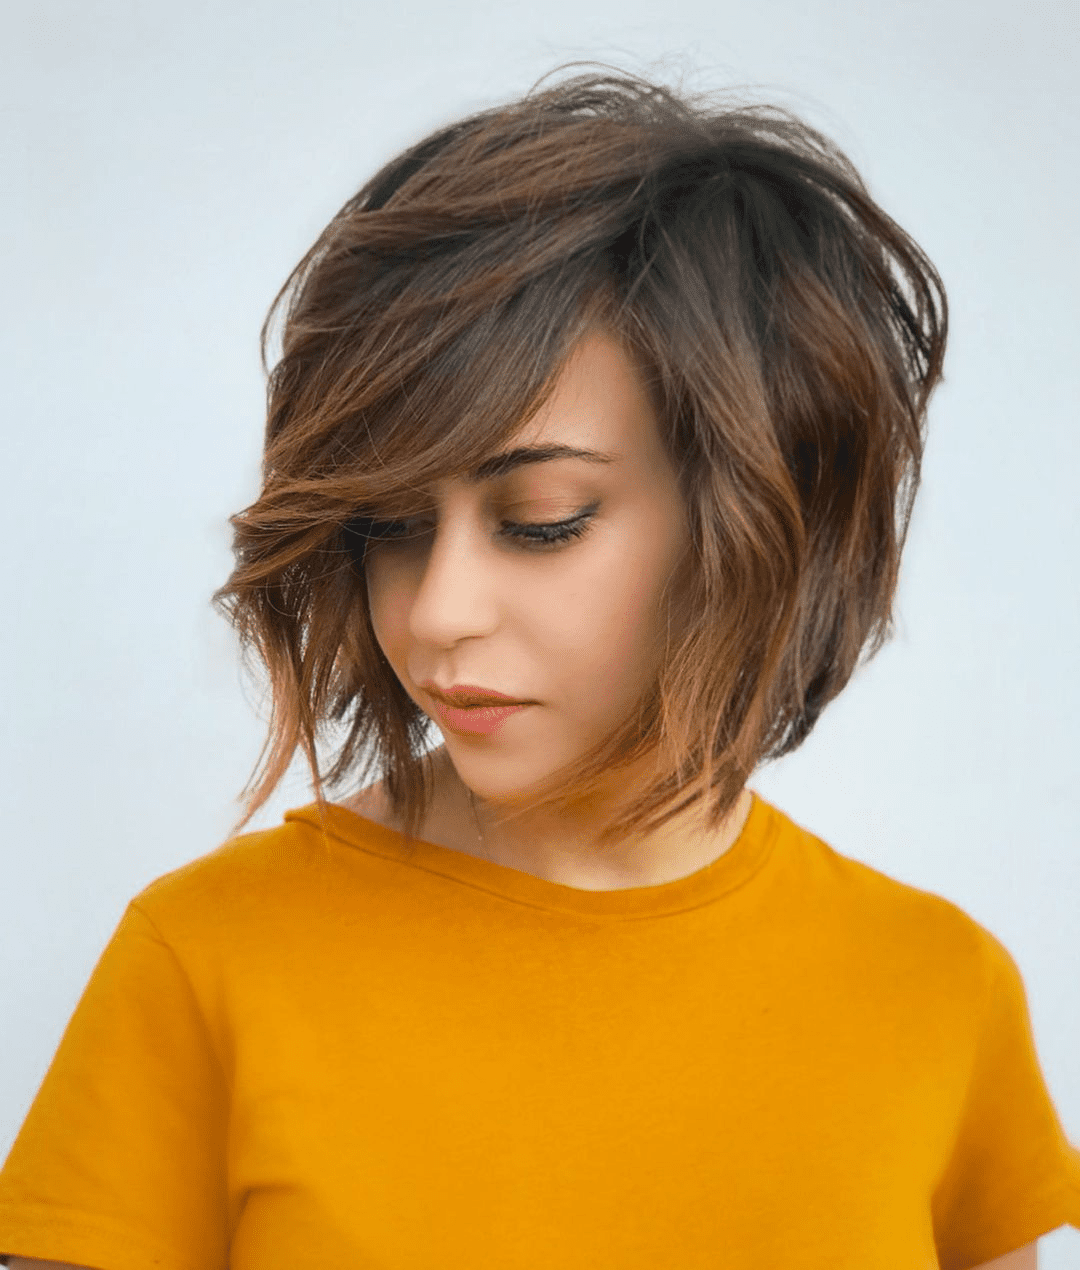 Embrace the Edgy Chic with a Choppy Bob Hairstyle